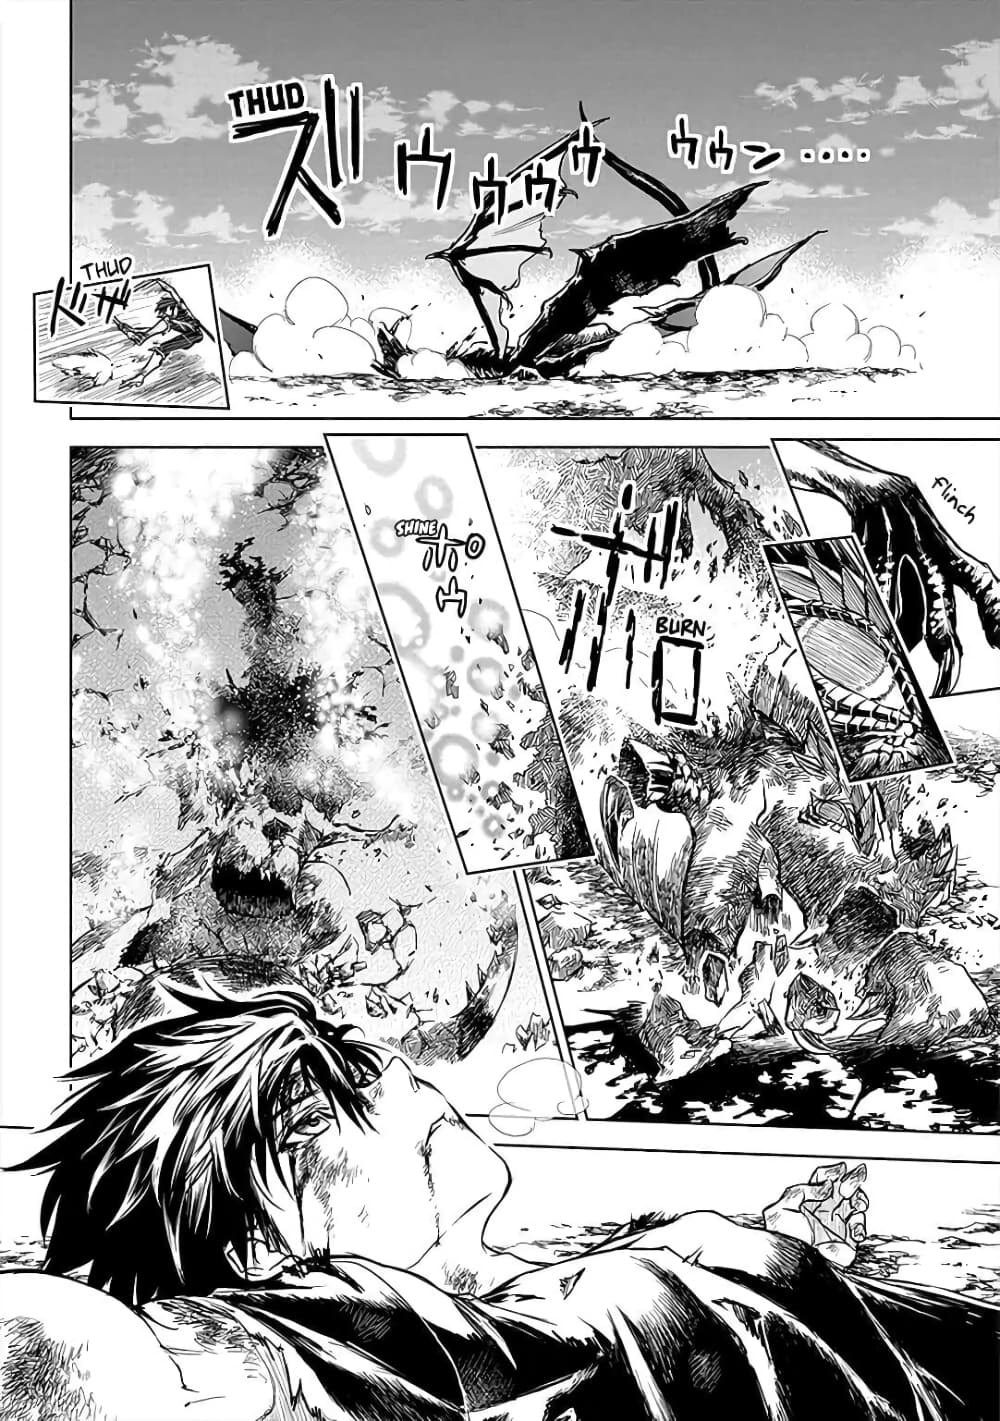 Ori of the Dragon Chain Heart in the Mind 8 (23)